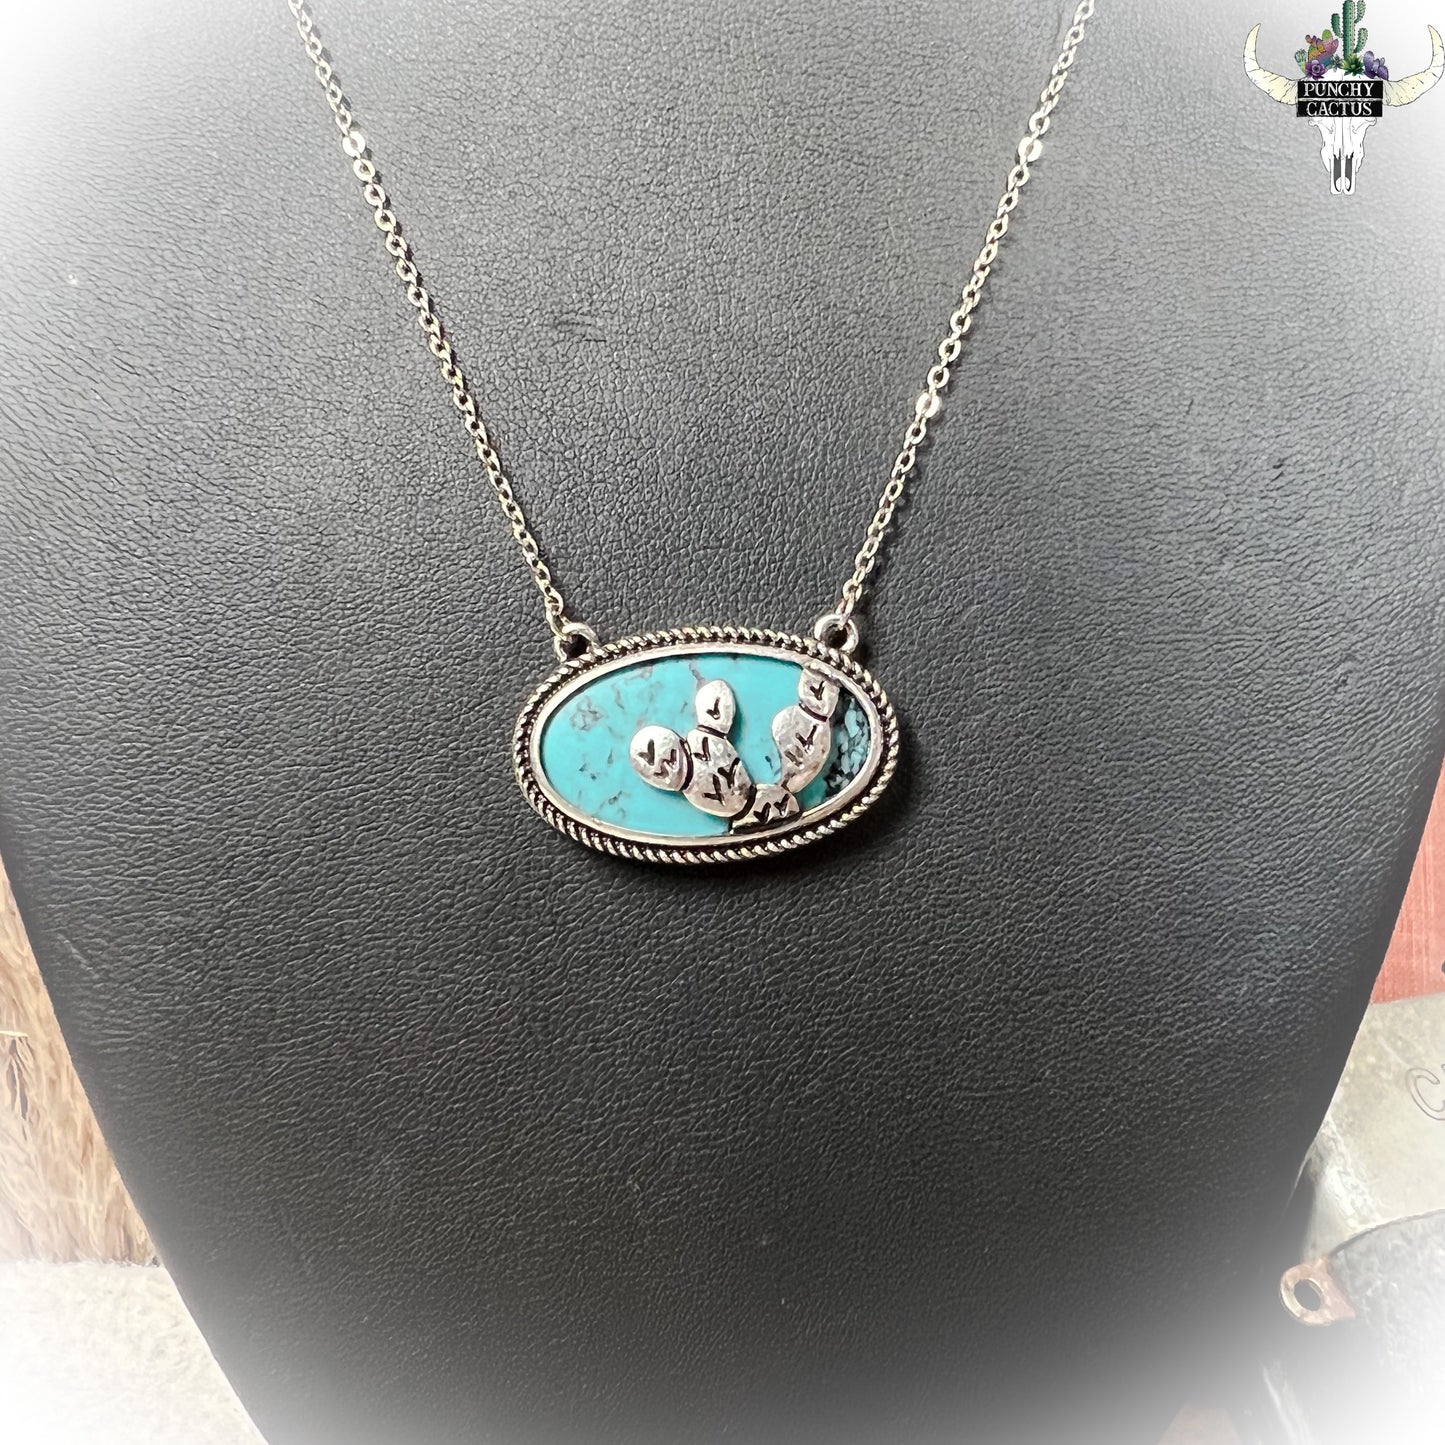 Cactus Necklace - Turquoise